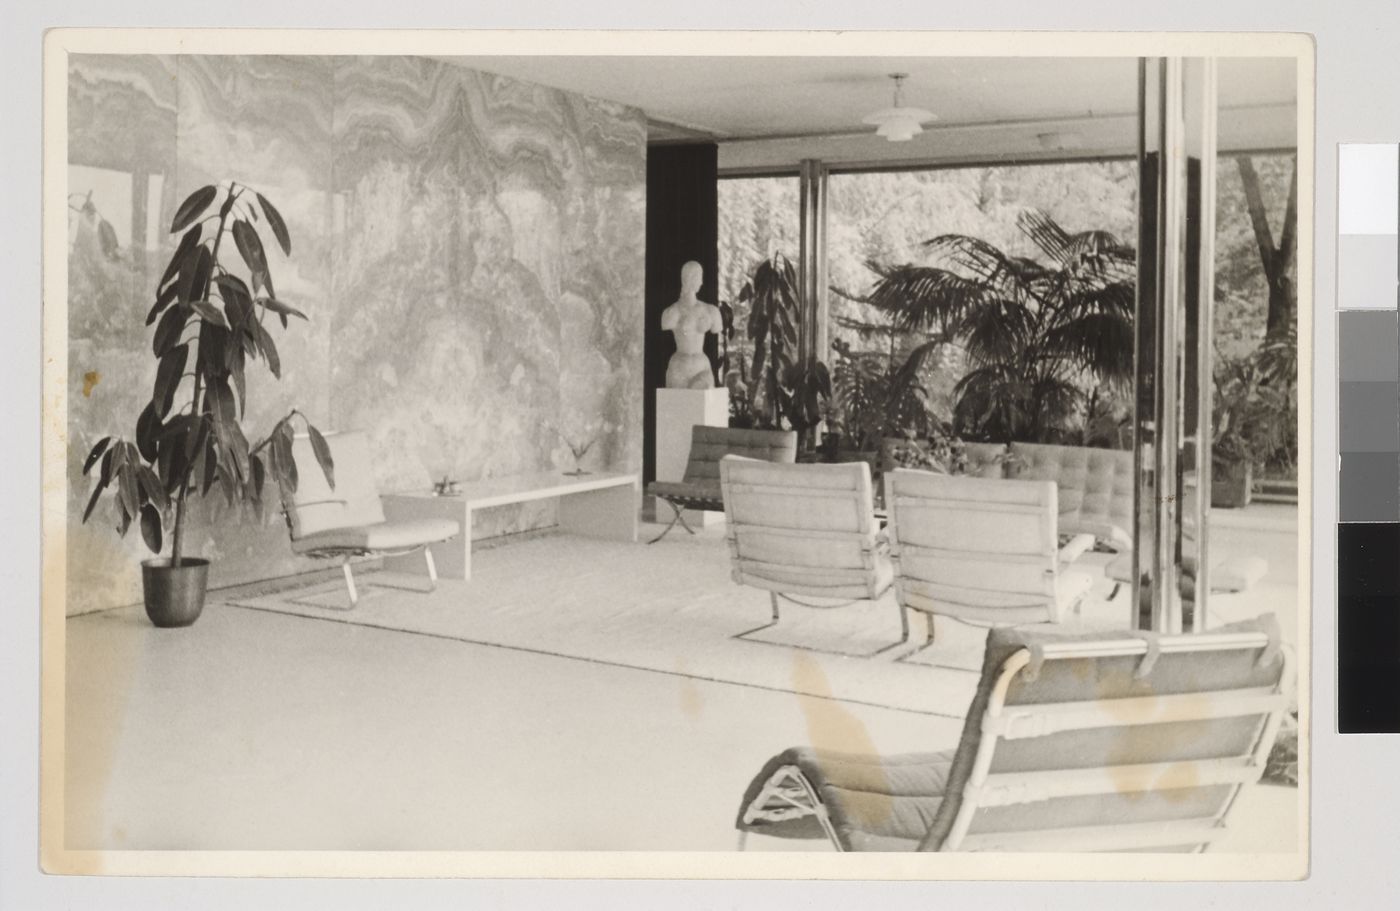 Interior view of the living area looking east showing the onyx wall and a statue on the left and a seating area in the centre, Tugendhat House, Brno, Czechoslovakia (now Czech Republic)